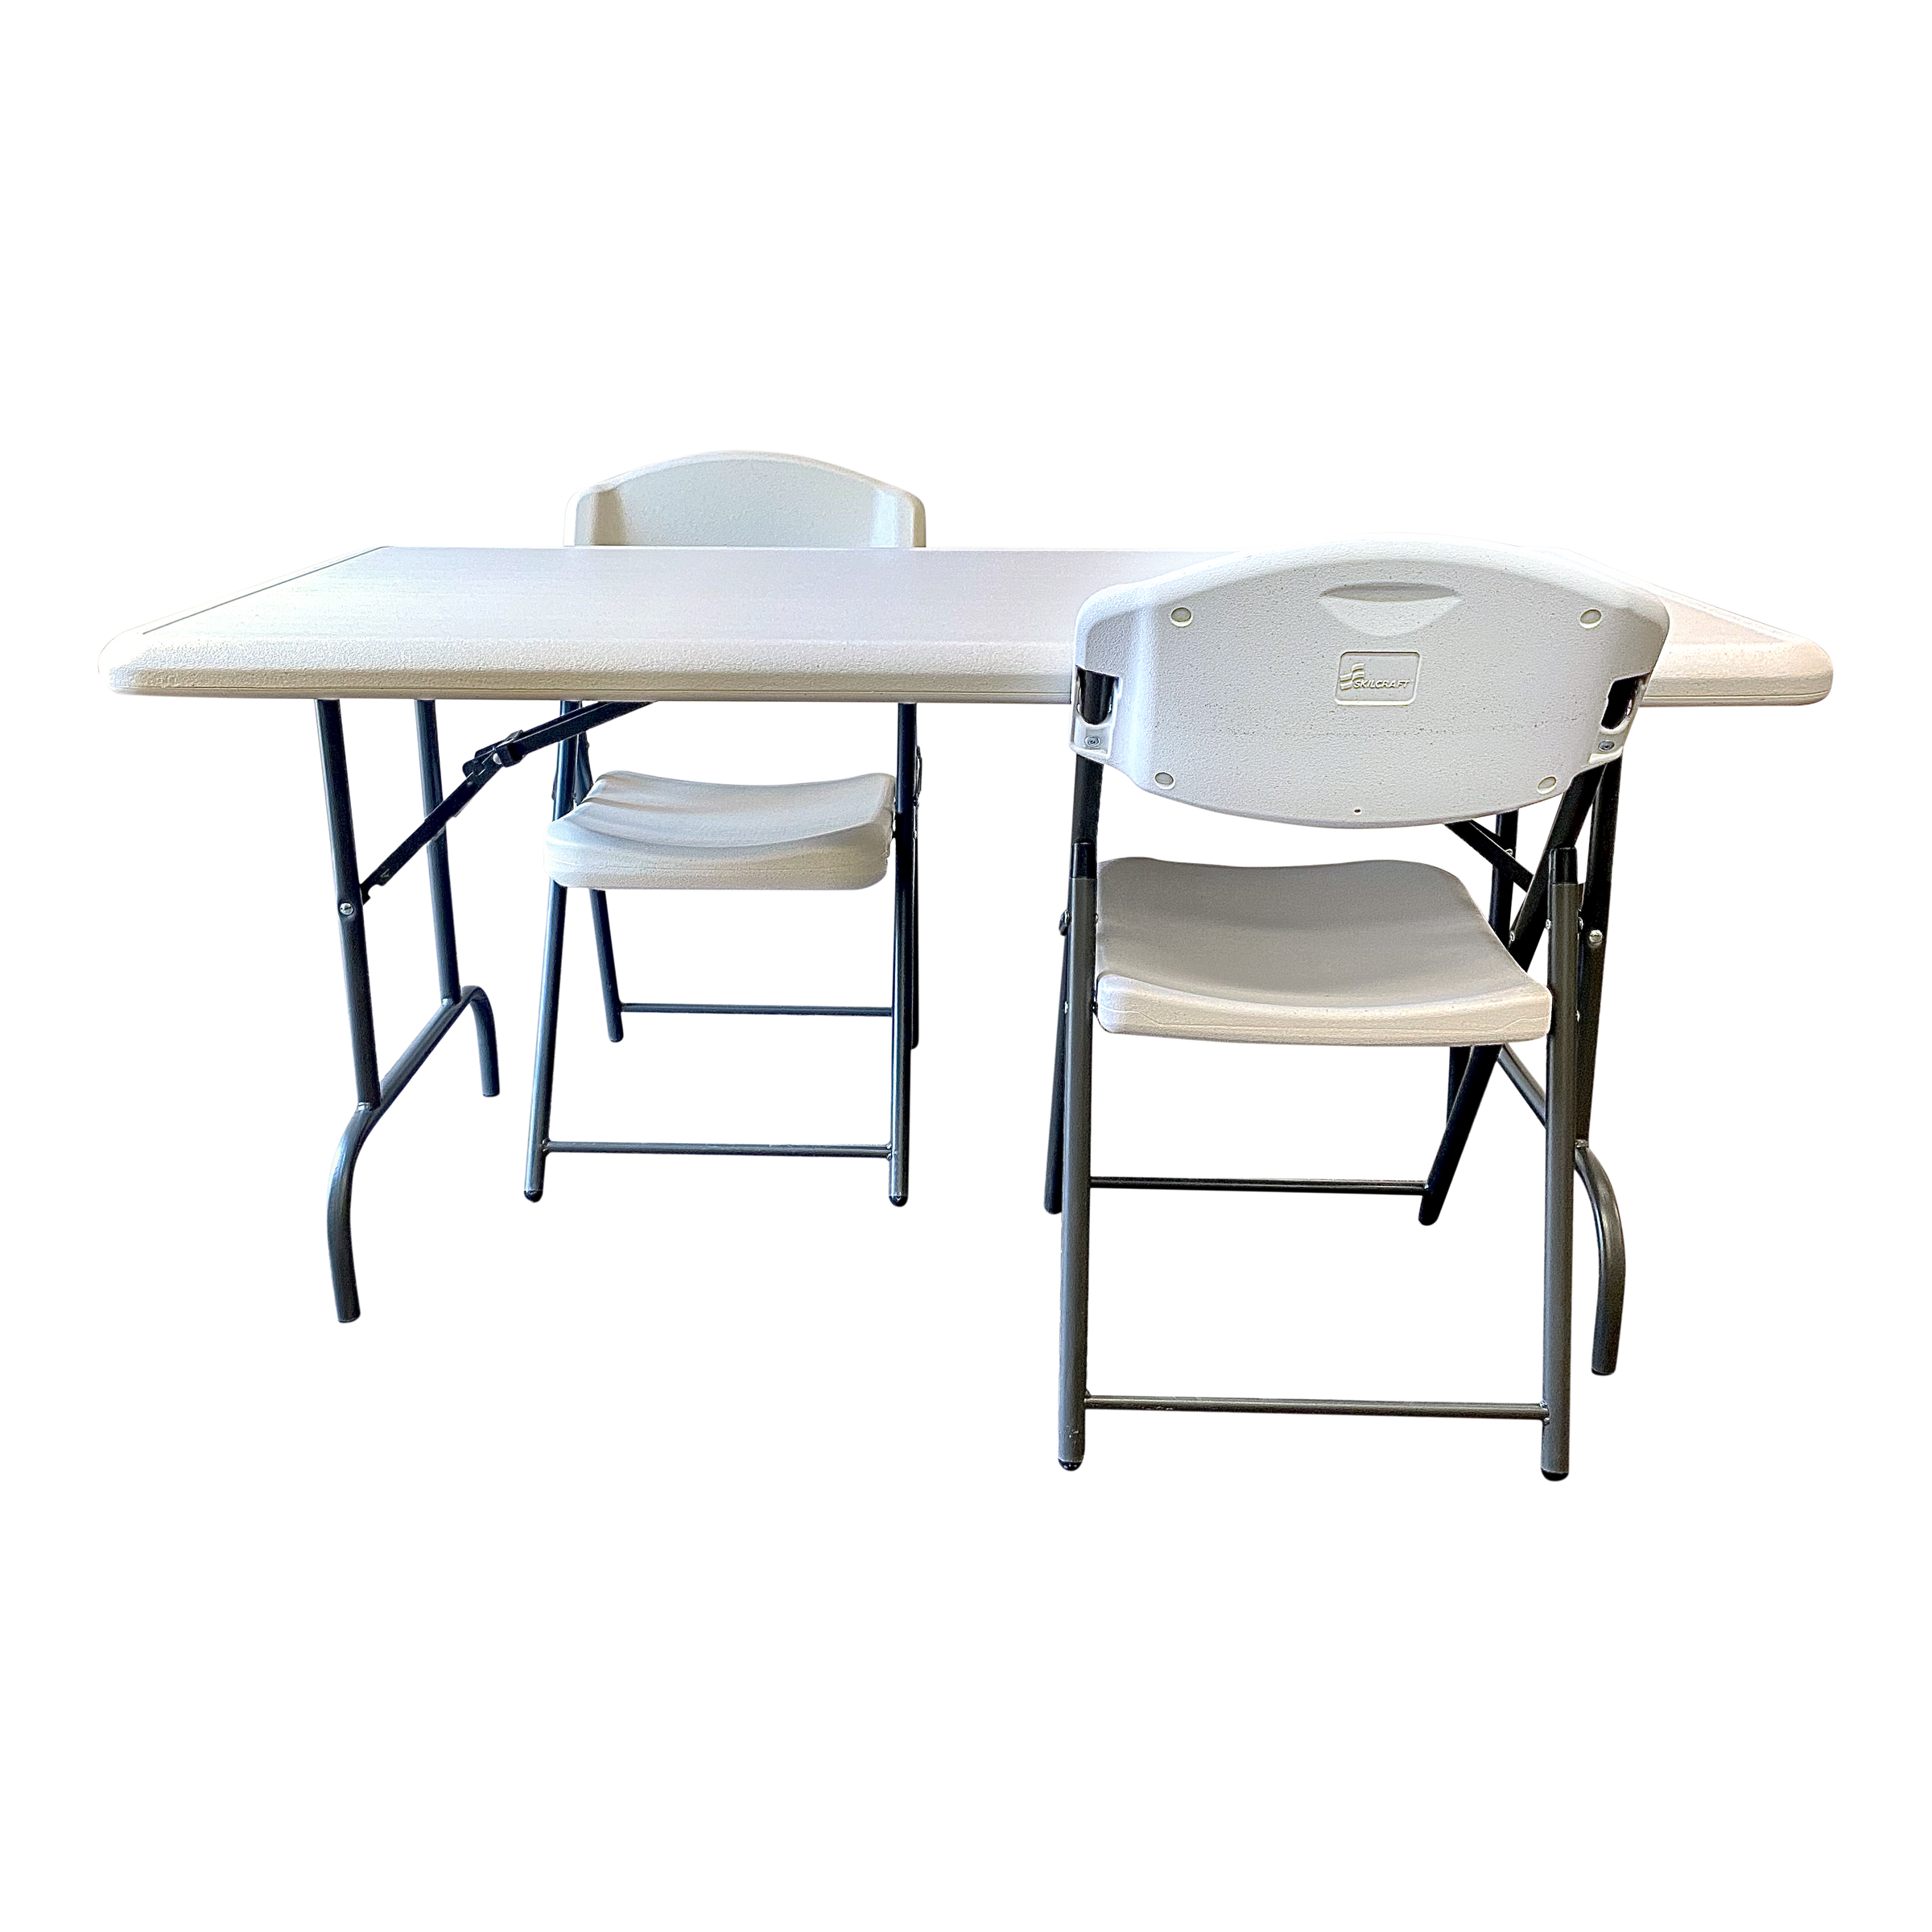 A platinum folding table with two platinum folding chairs around it.